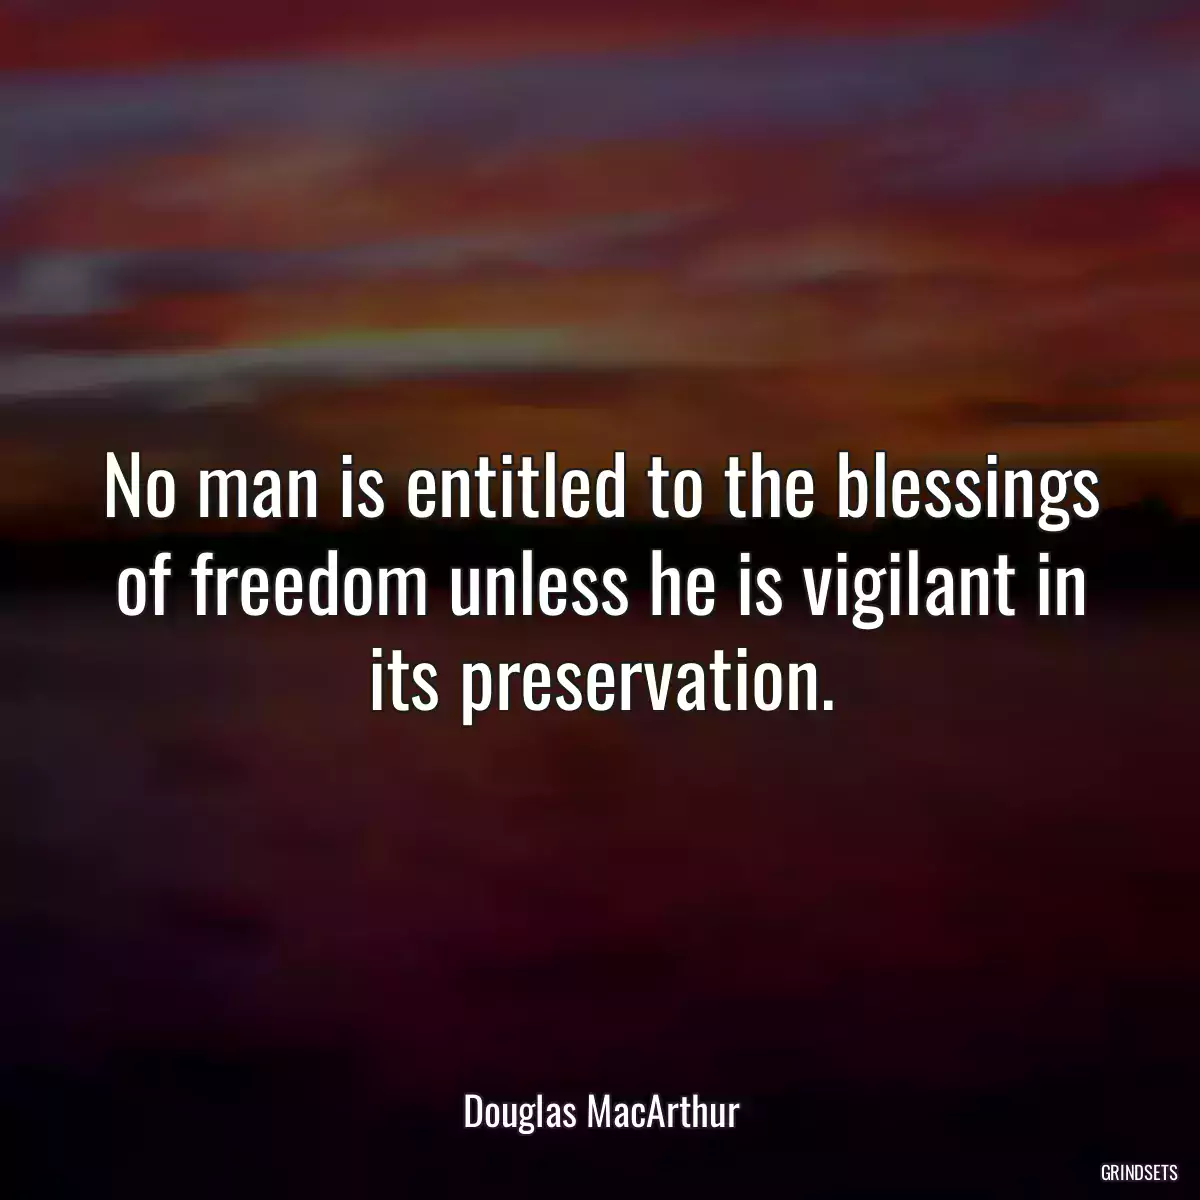 No man is entitled to the blessings of freedom unless he is vigilant in its preservation.